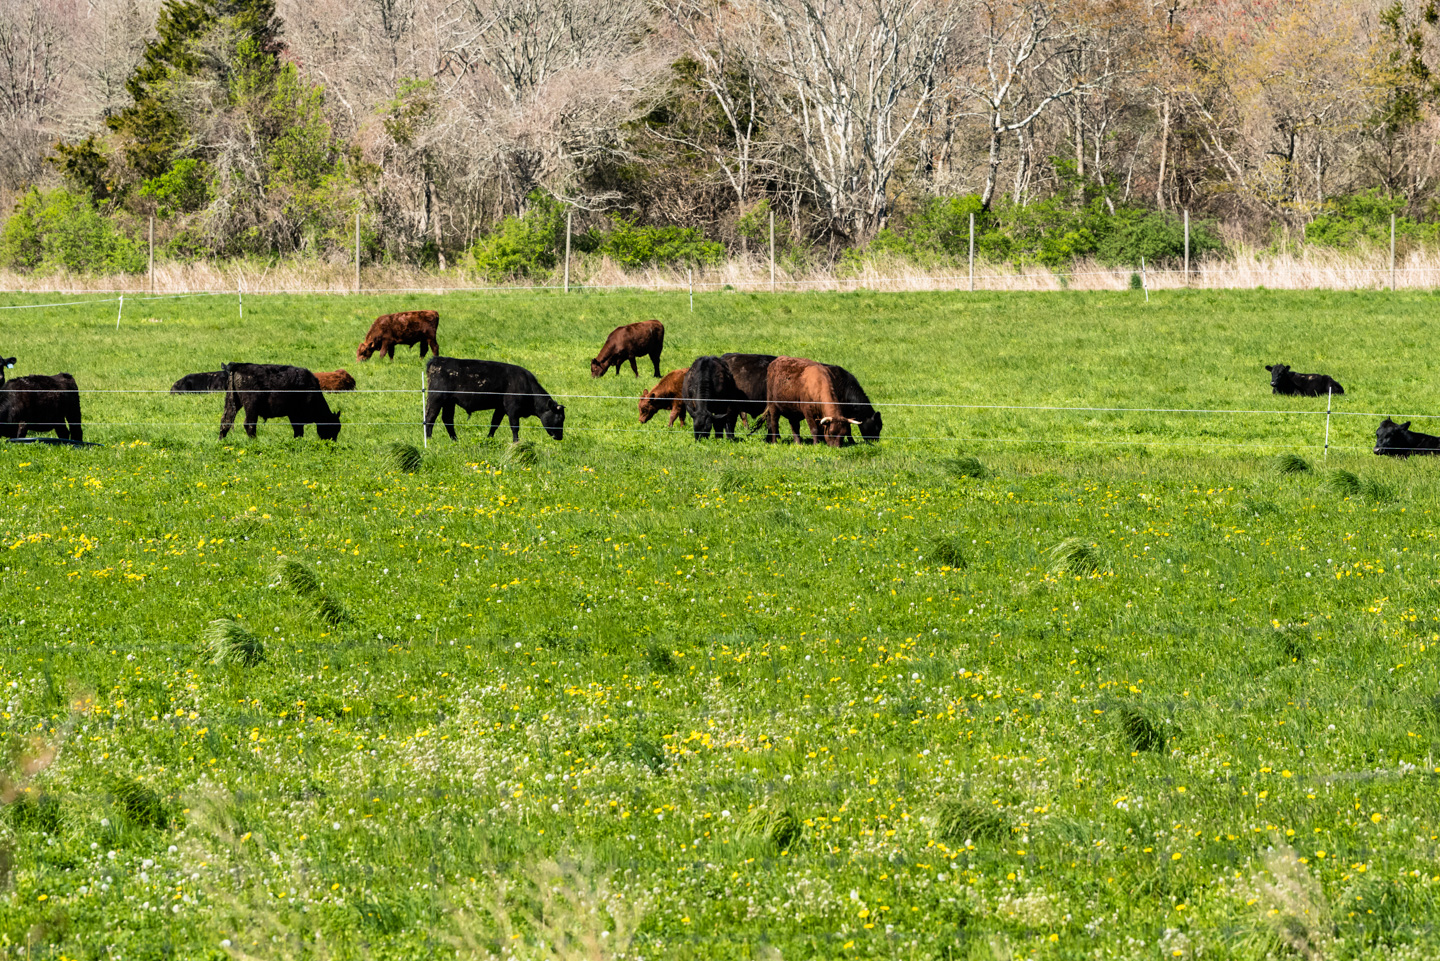 Cattle eating grass in a field